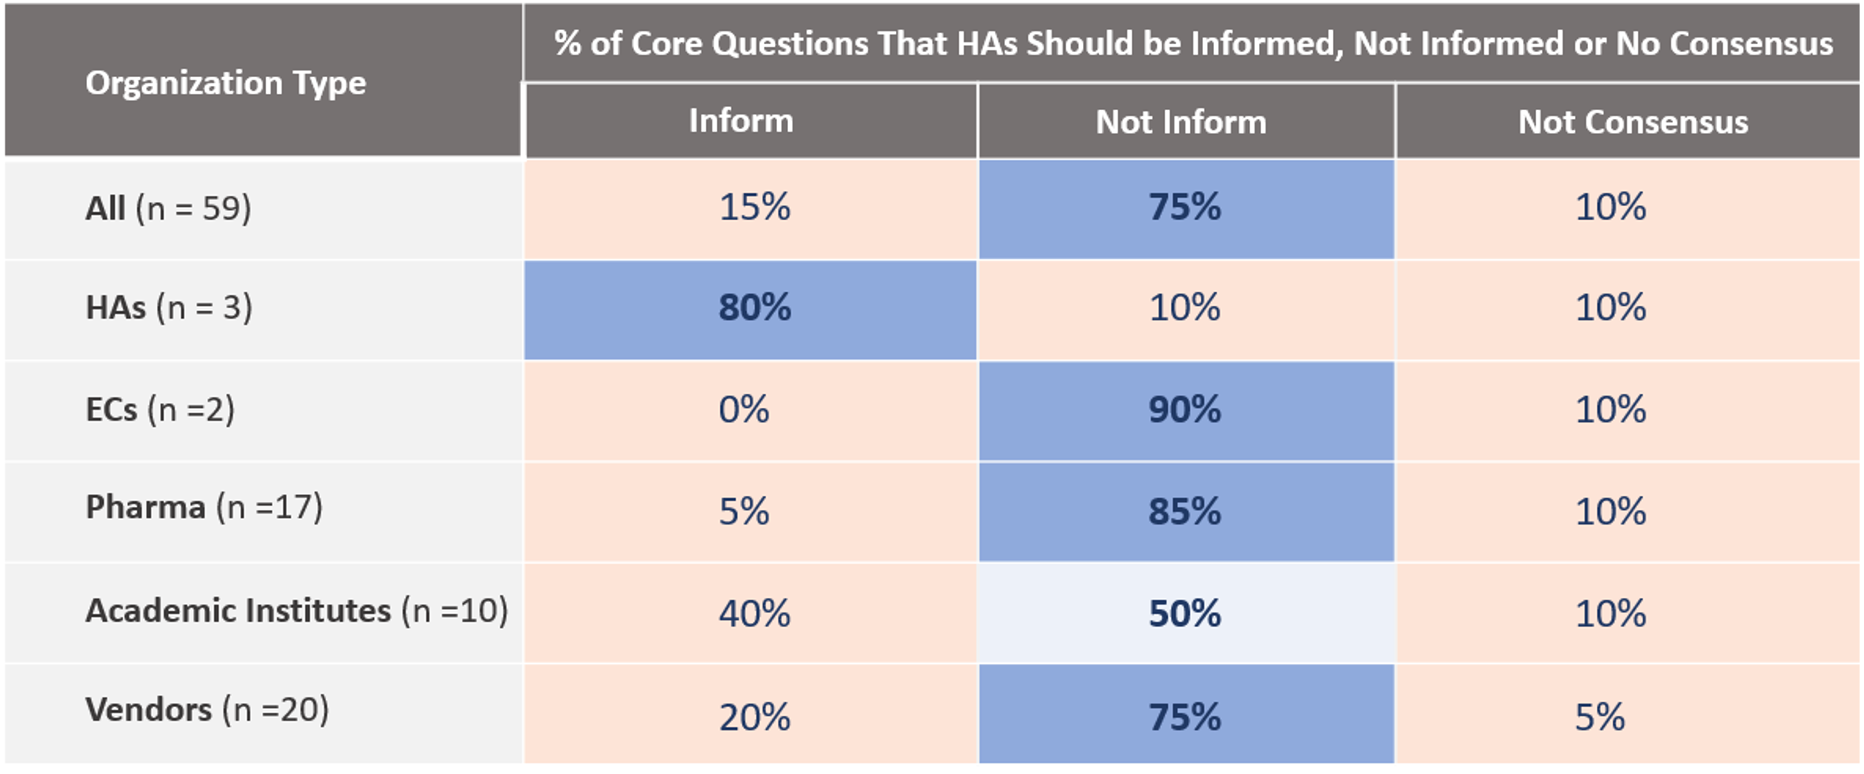 Table 3: Overview of responses, divided per organization type, on whether HAs should be informed or not.